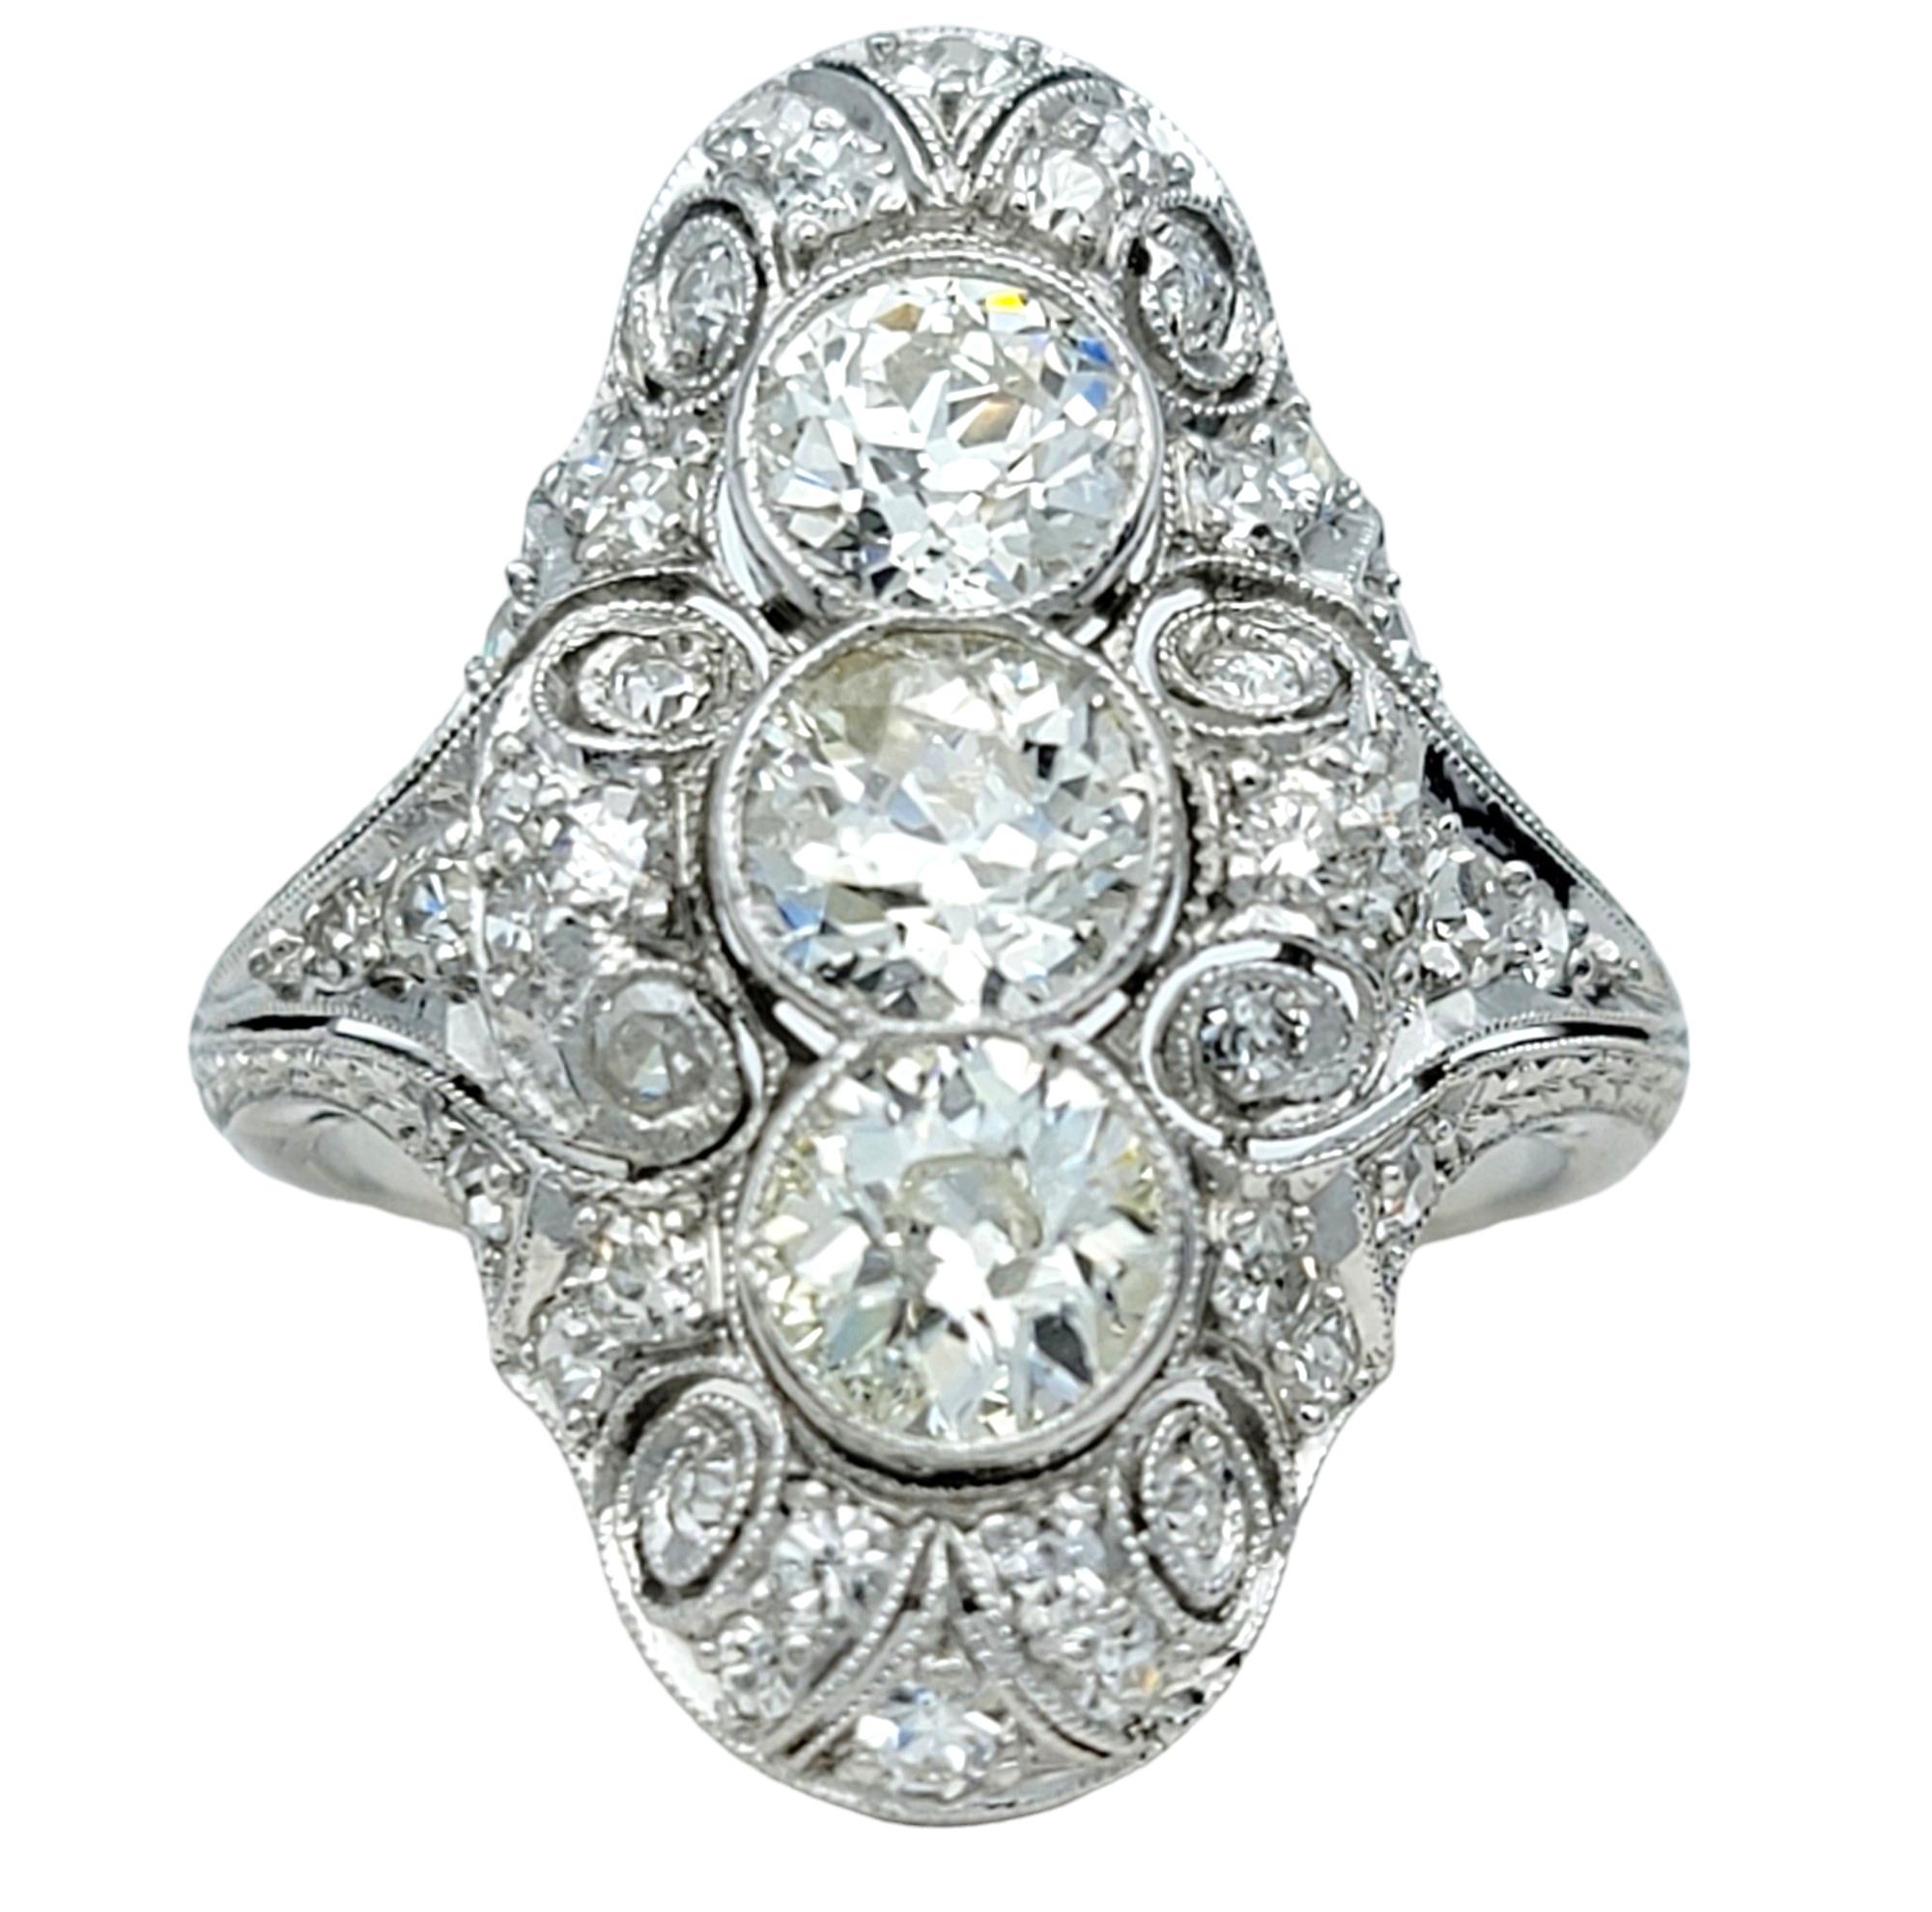 Ring Size: 7.75

This exquisite art deco era diamond ring exudes timeless elegance and sophistication. Set in platinum, it features three larger old European cut diamonds arranged in a row along the center, creating a stunning focal point.